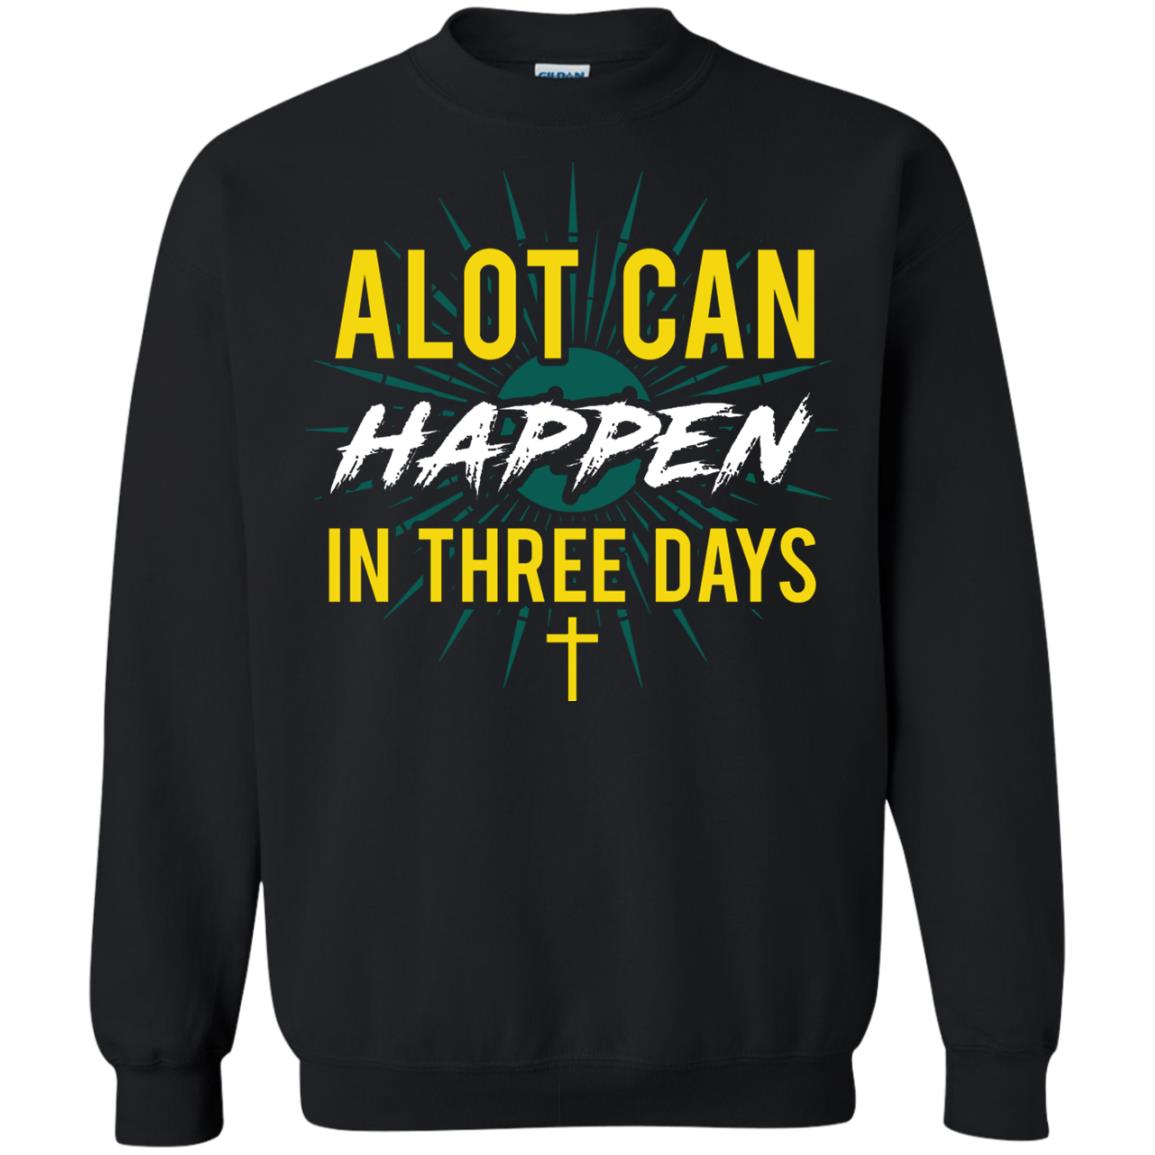 Alot Can Happen In Three Days Christian T-shirt For Easter Day